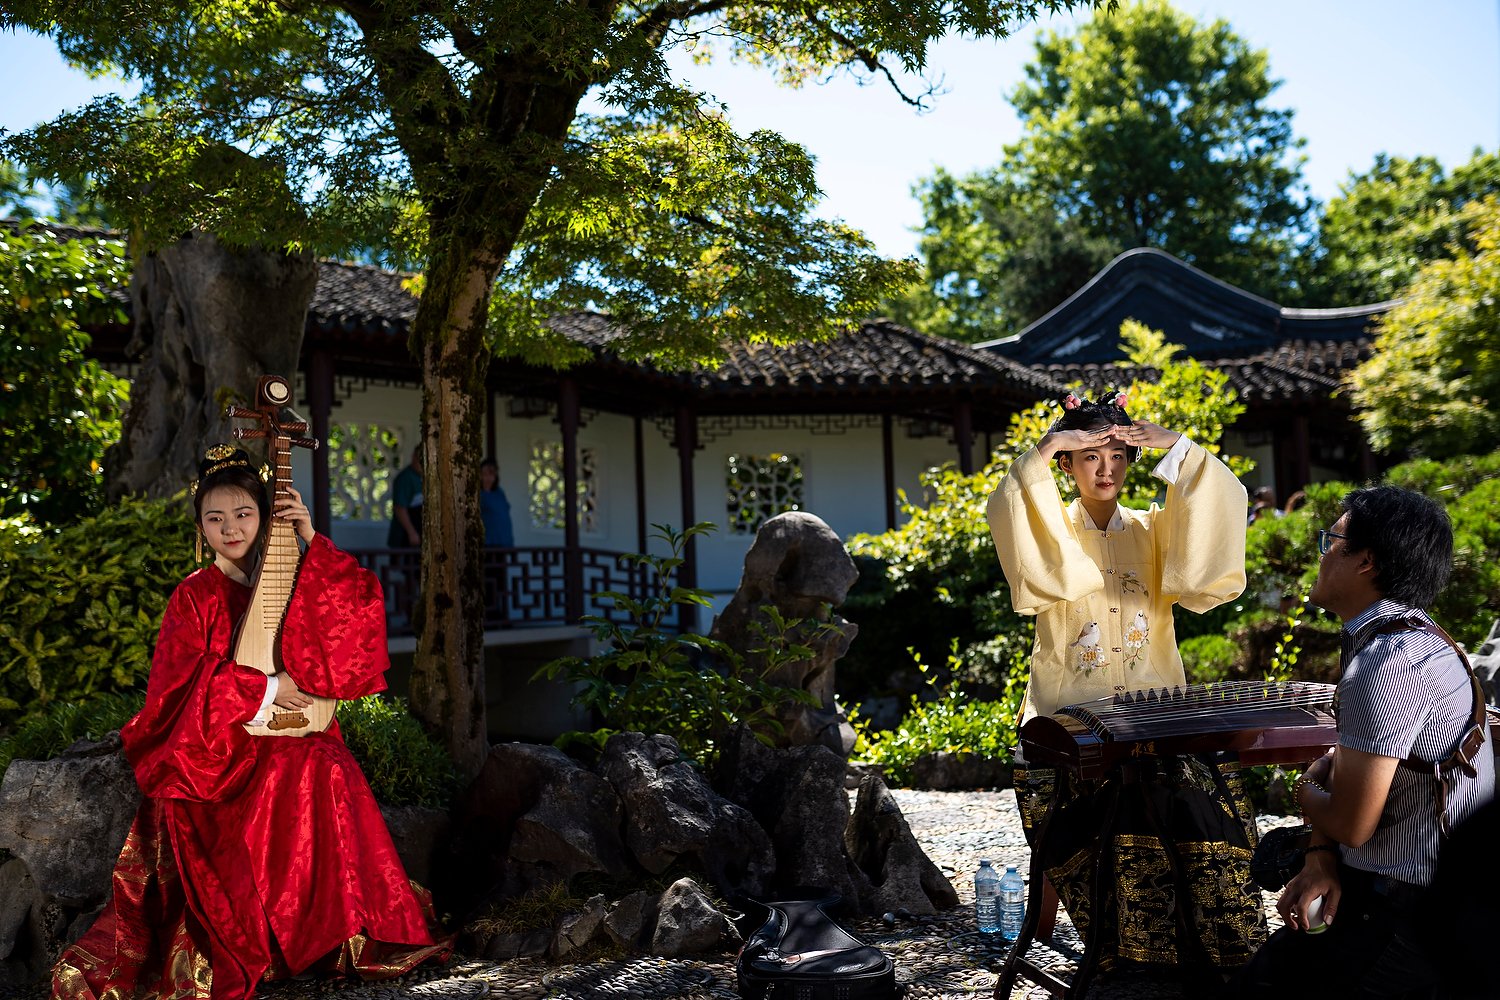  Tian Ge, Xinyun Zheng and photographer Kuna taking part of the Life In the Ming Dynasty event at the Dr. Sun Yat-Sen Classical Chinese Garden hosted by the Hanfu Culture Society in Vancouver, B.C., on August 07, 2022. Jimmy Jeong/The Globe and Mail.